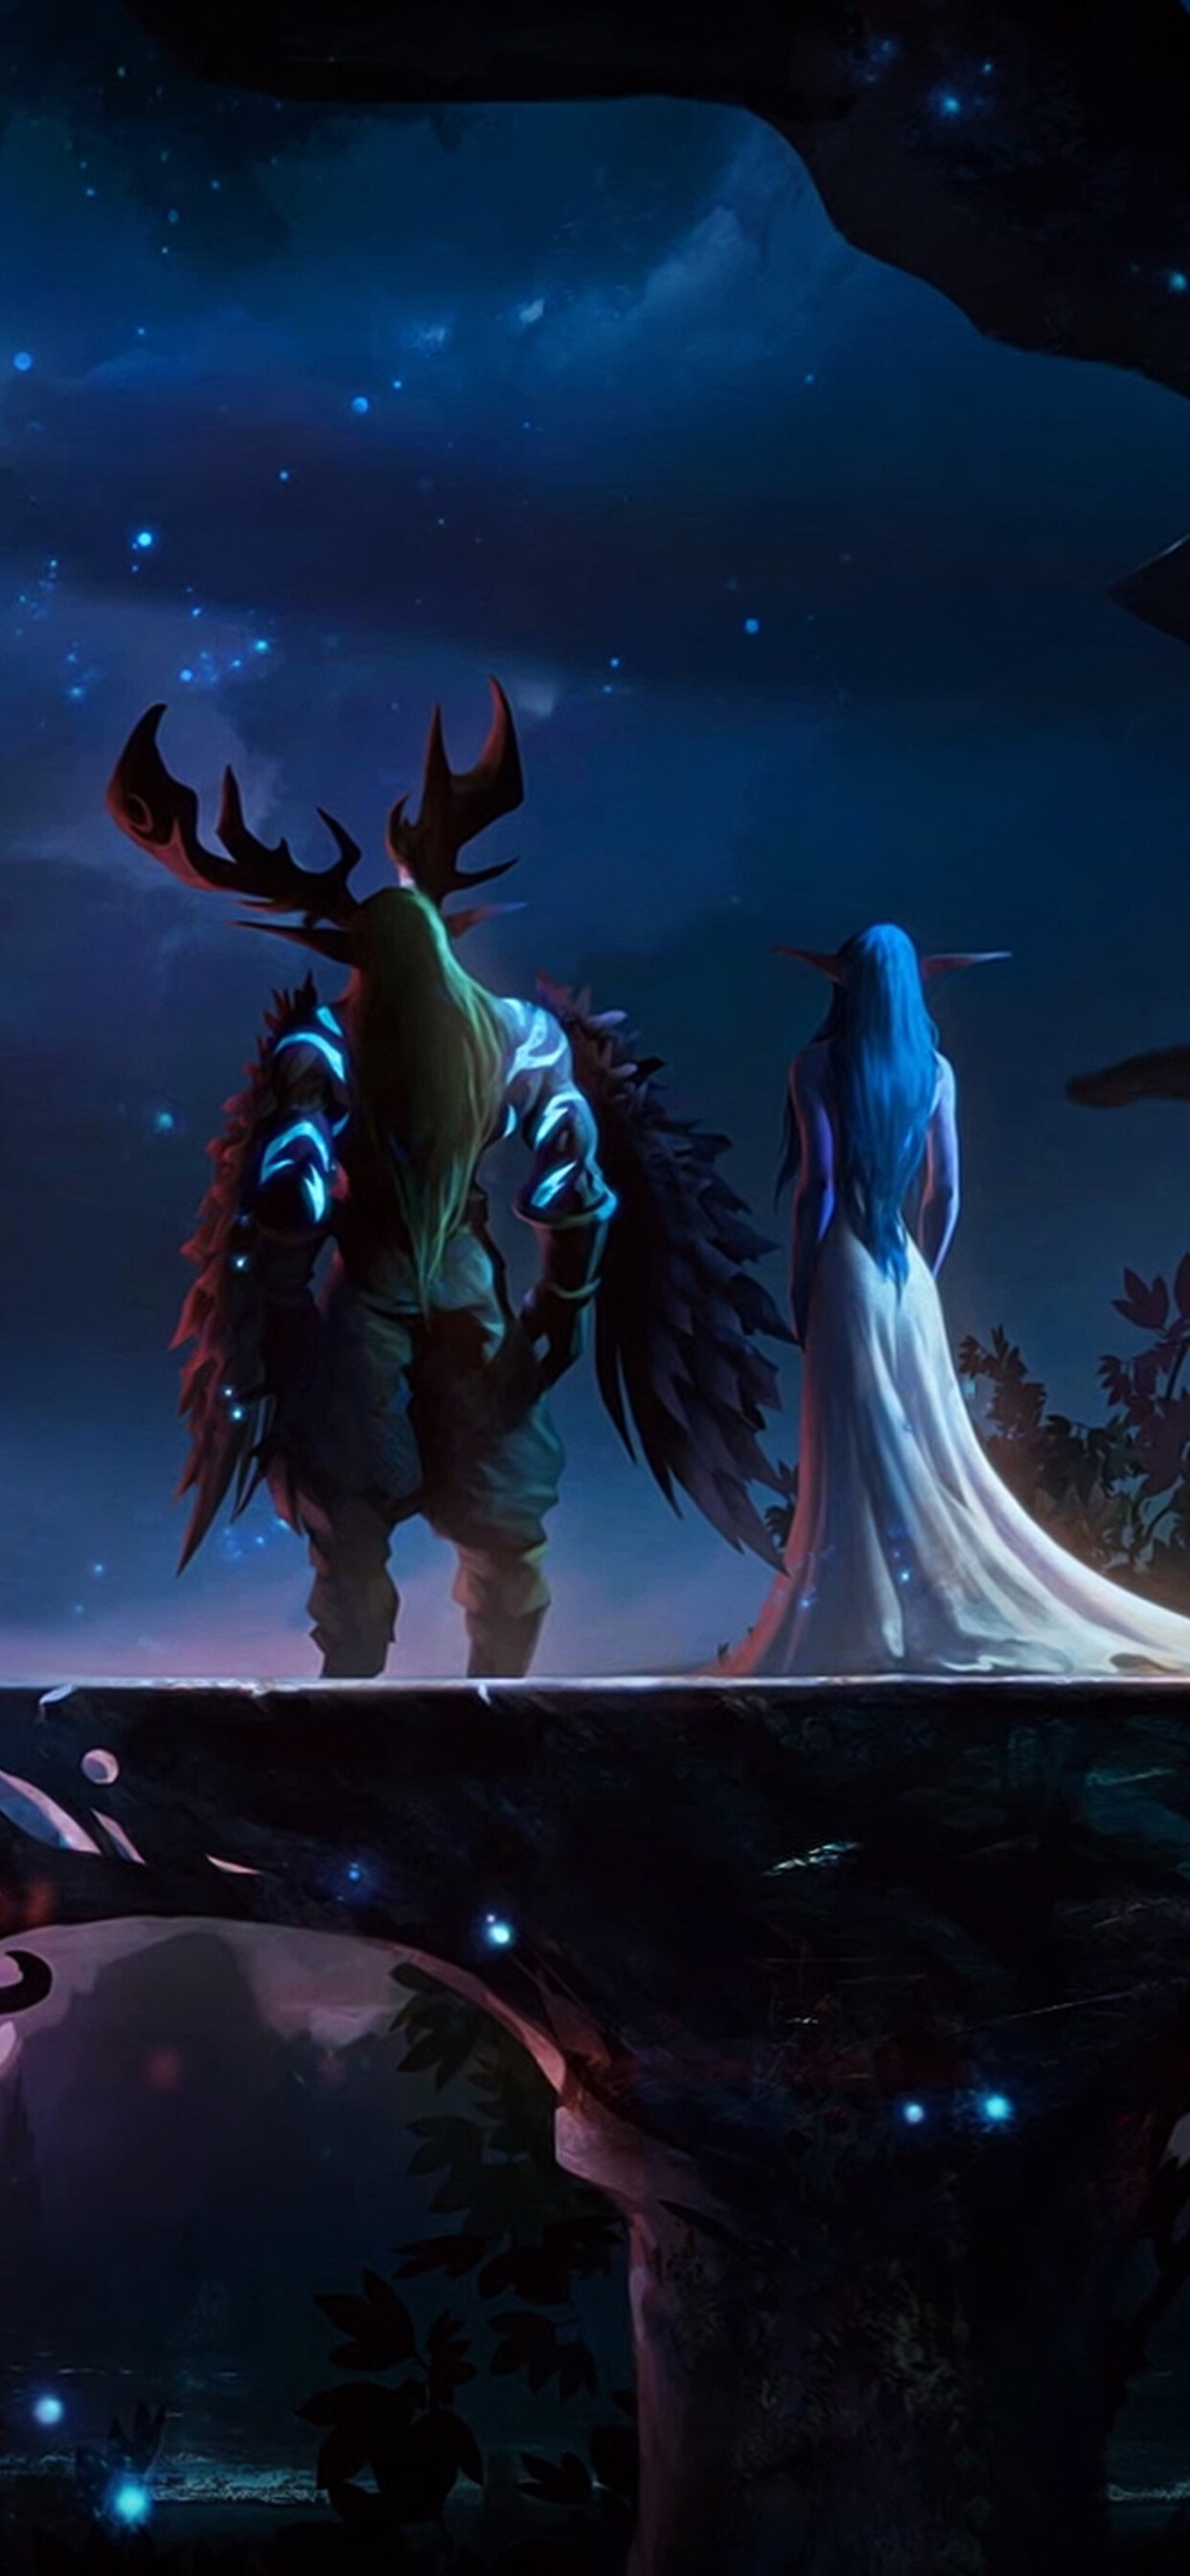 World of Warcraft: Malfurion Stormrage and Queen Azshara, WoW. 1250x2690 HD Background.